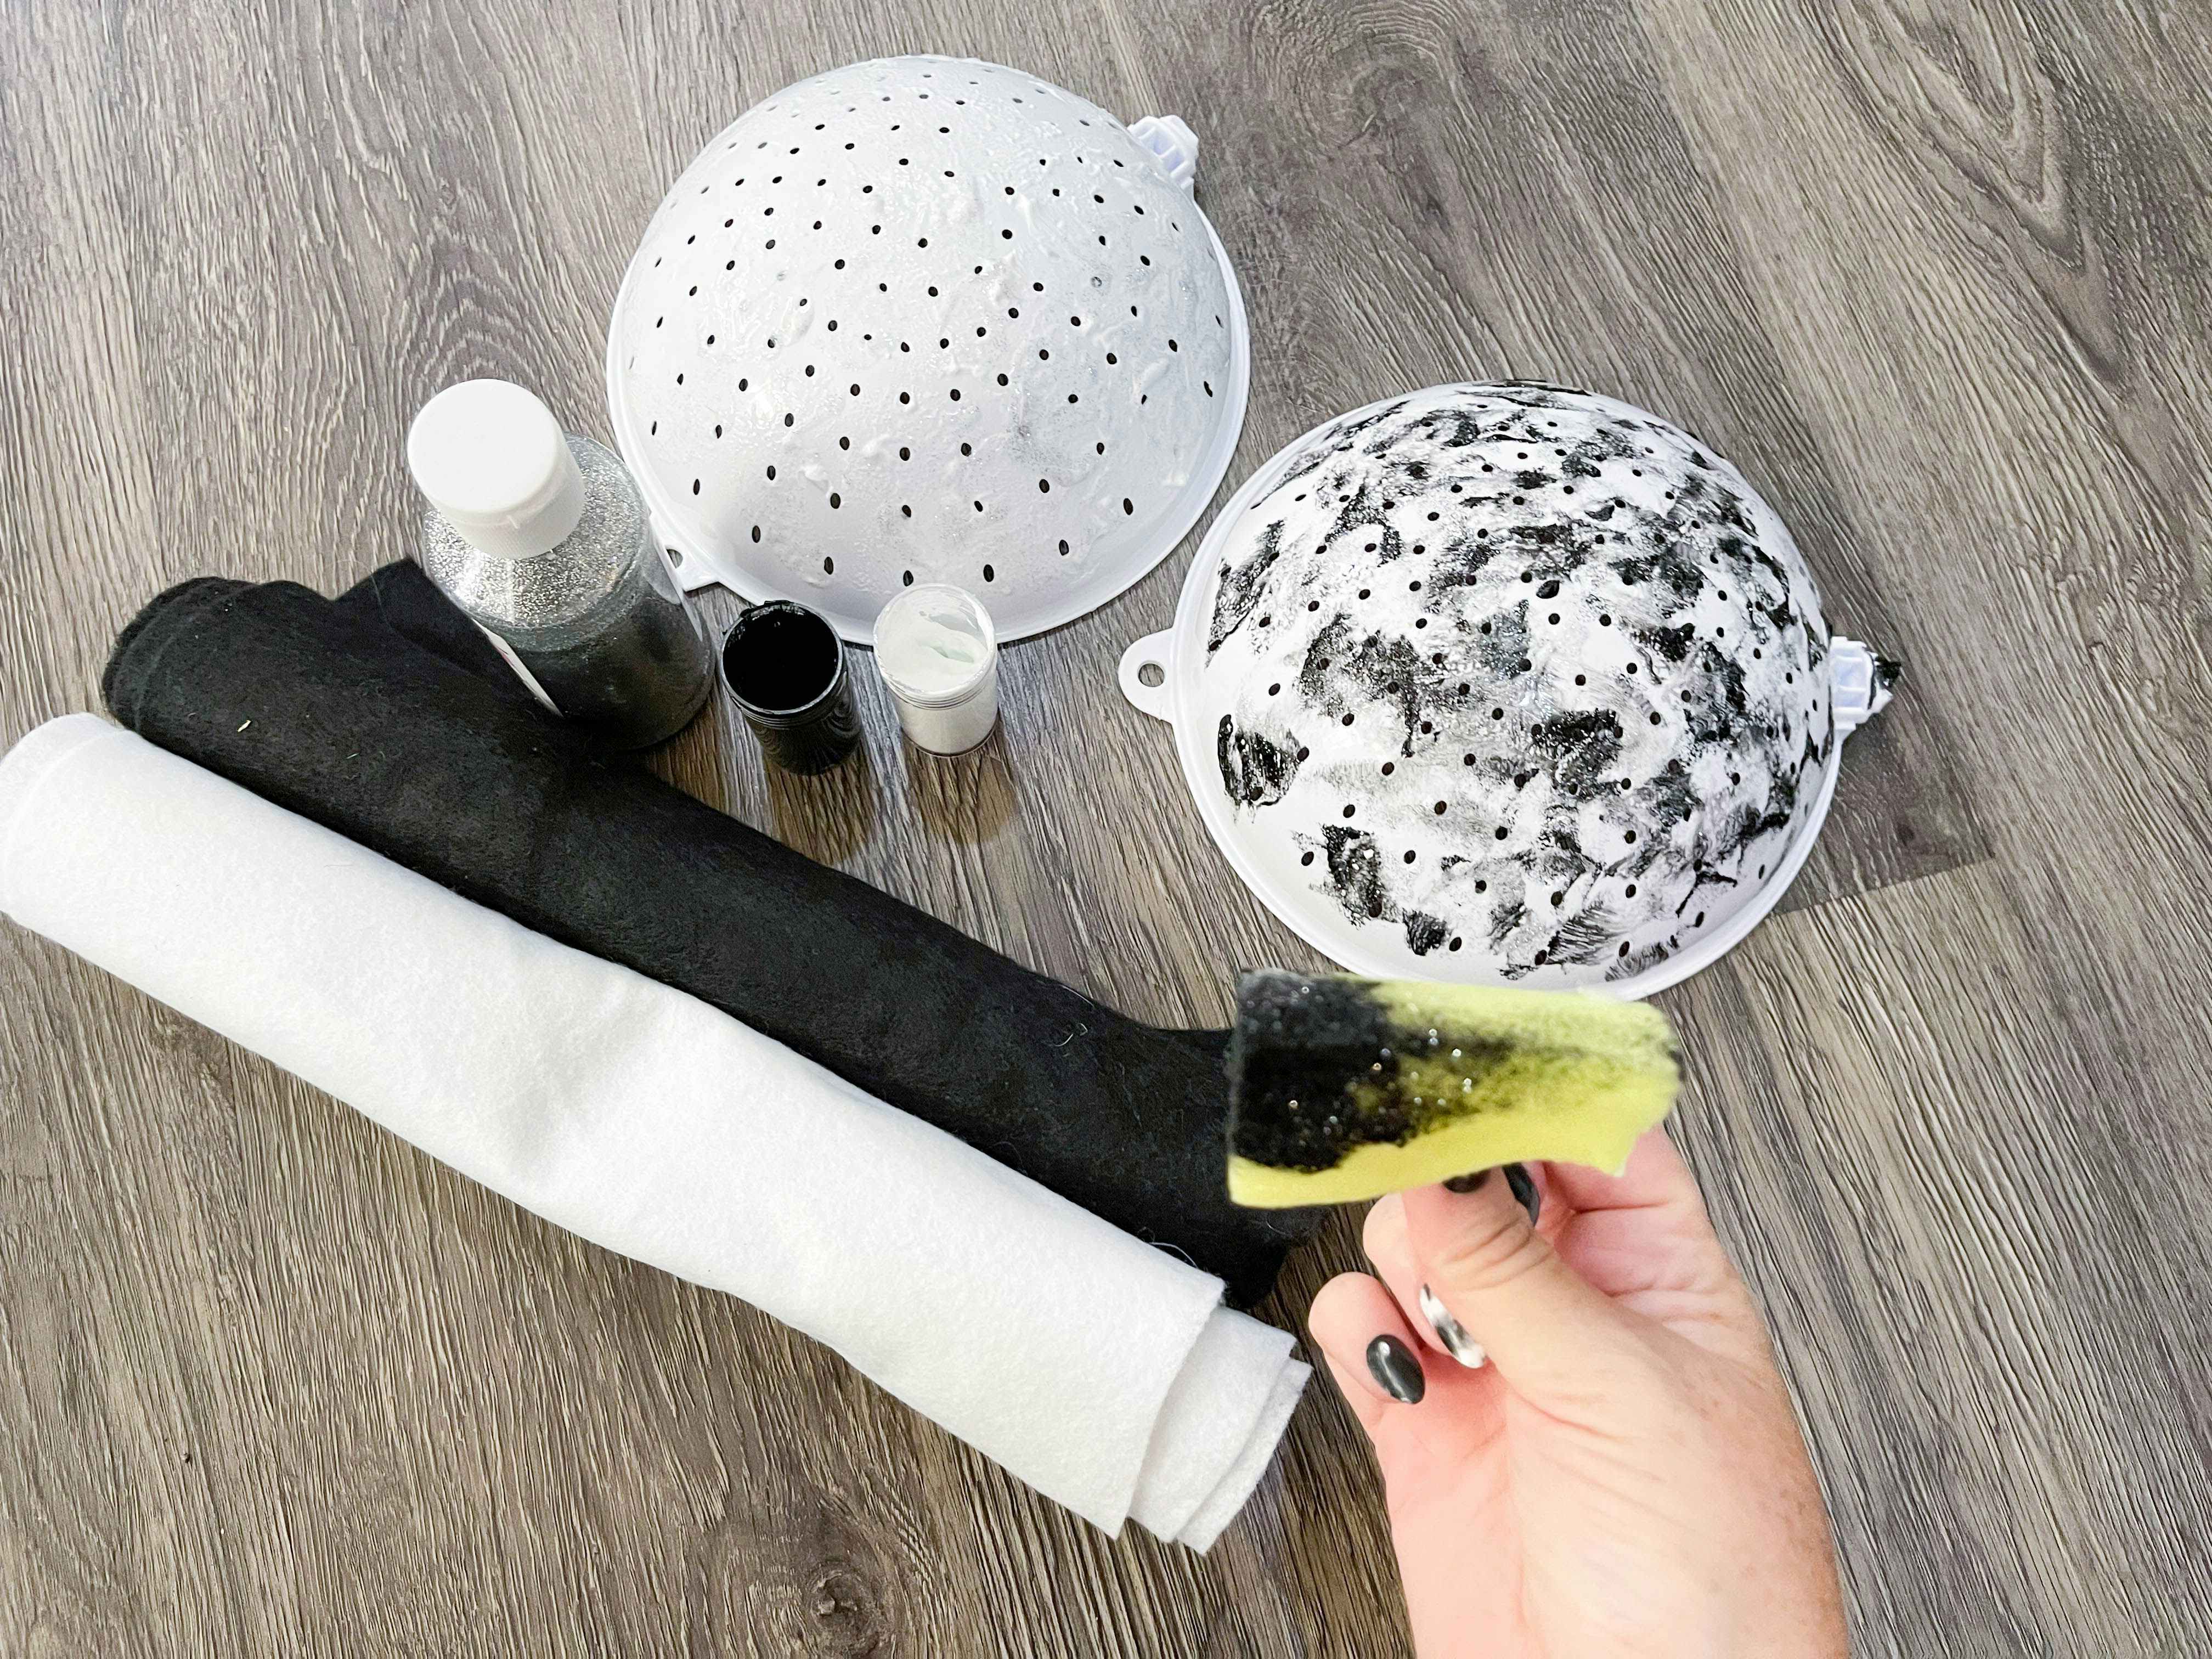 A person's hand holding a sponge with black paint on it in front of some materials for a DIY salt and pepper Halloween costume.